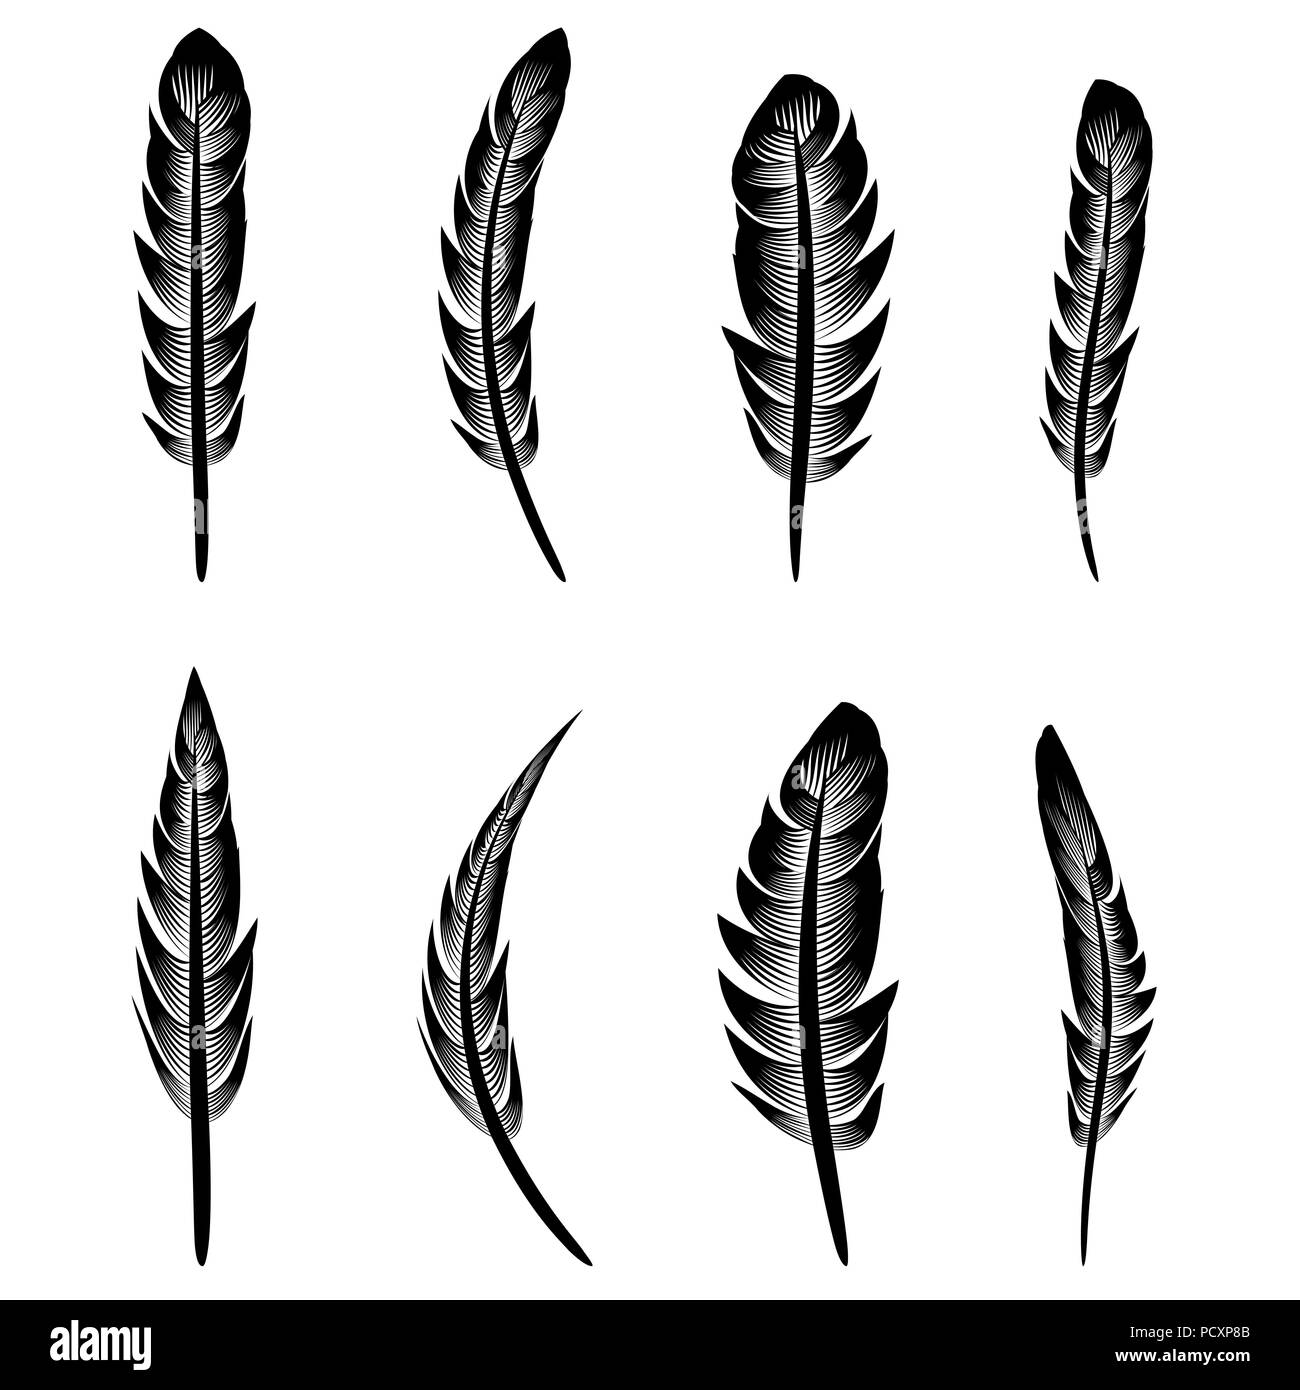 Old Script Script With Stamp And Feathers For Writing Vector Illustration  Isolated On White Background EPS10. Transparent Objects Used For Shadows  And Lights Drawing. Royalty Free SVG, Cliparts, Vectors, and Stock  Illustration.